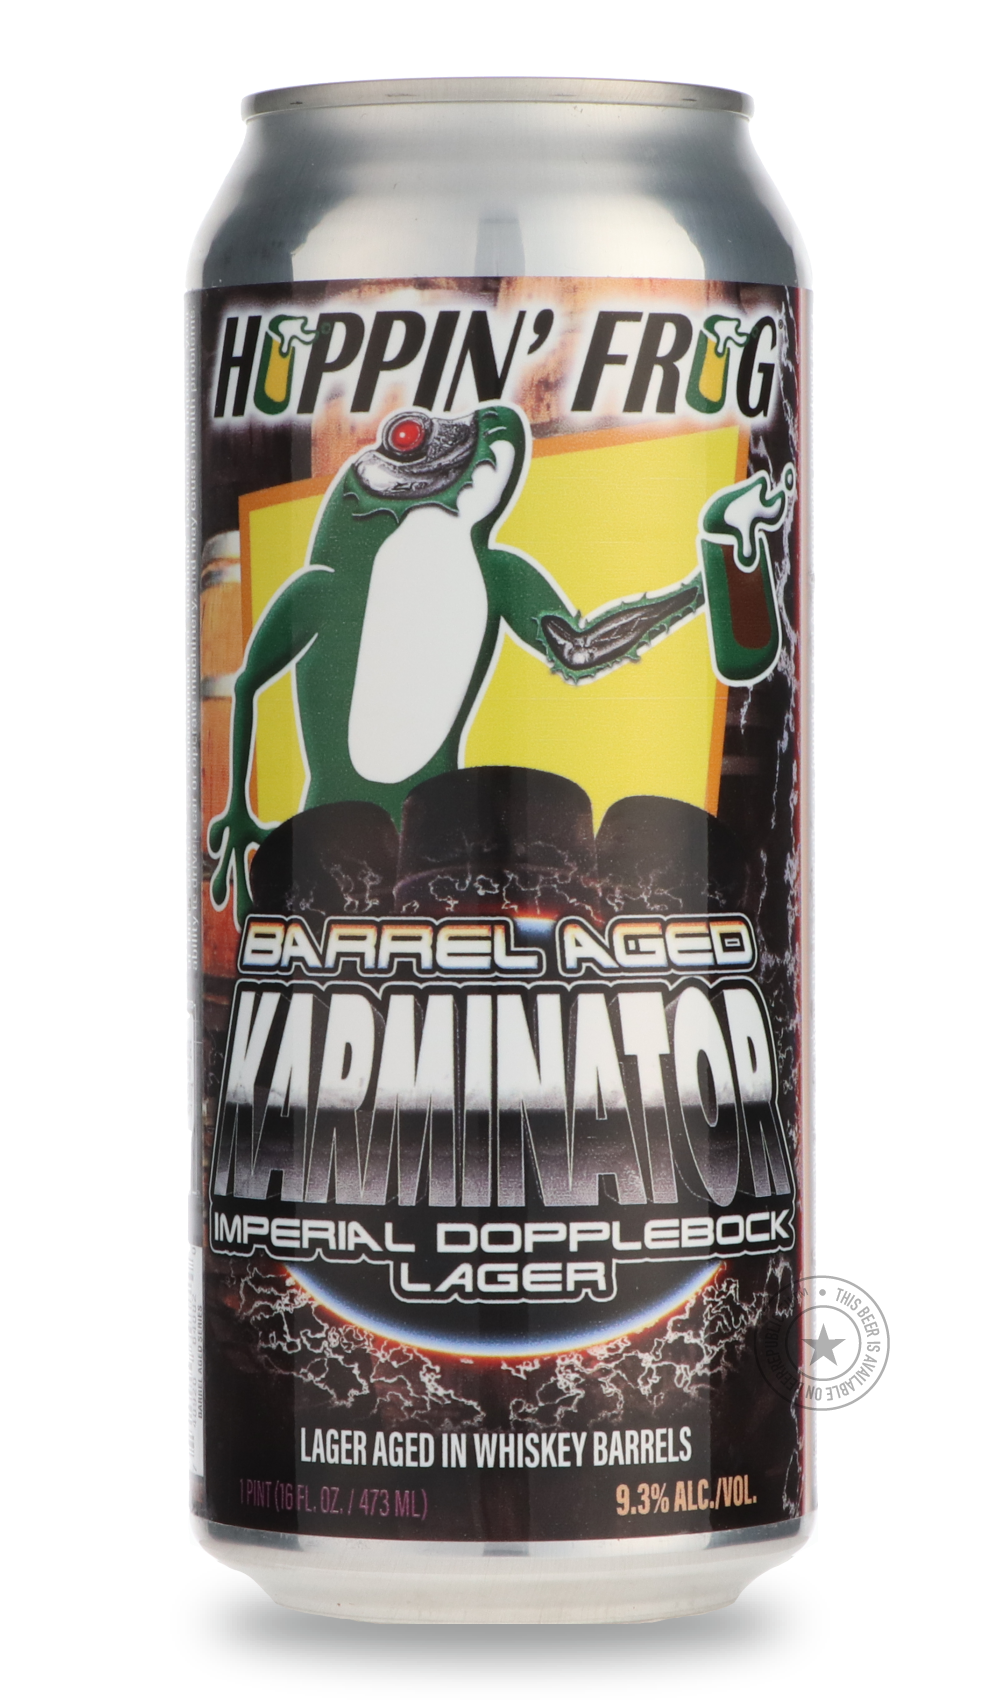 -Hoppin' Frog- Barrel Aged Karminator Imperial Dopplebock Lager-Brown & Dark- Only @ Beer Republic - The best online beer store for American & Canadian craft beer - Buy beer online from the USA and Canada - Bier online kopen - Amerikaans bier kopen - Craft beer store - Craft beer kopen - Amerikanisch bier kaufen - Bier online kaufen - Acheter biere online - IPA - Stout - Porter - New England IPA - Hazy IPA - Imperial Stout - Barrel Aged - Barrel Aged Imperial Stout - Brown - Dark beer - Blond - Blonde - Pil